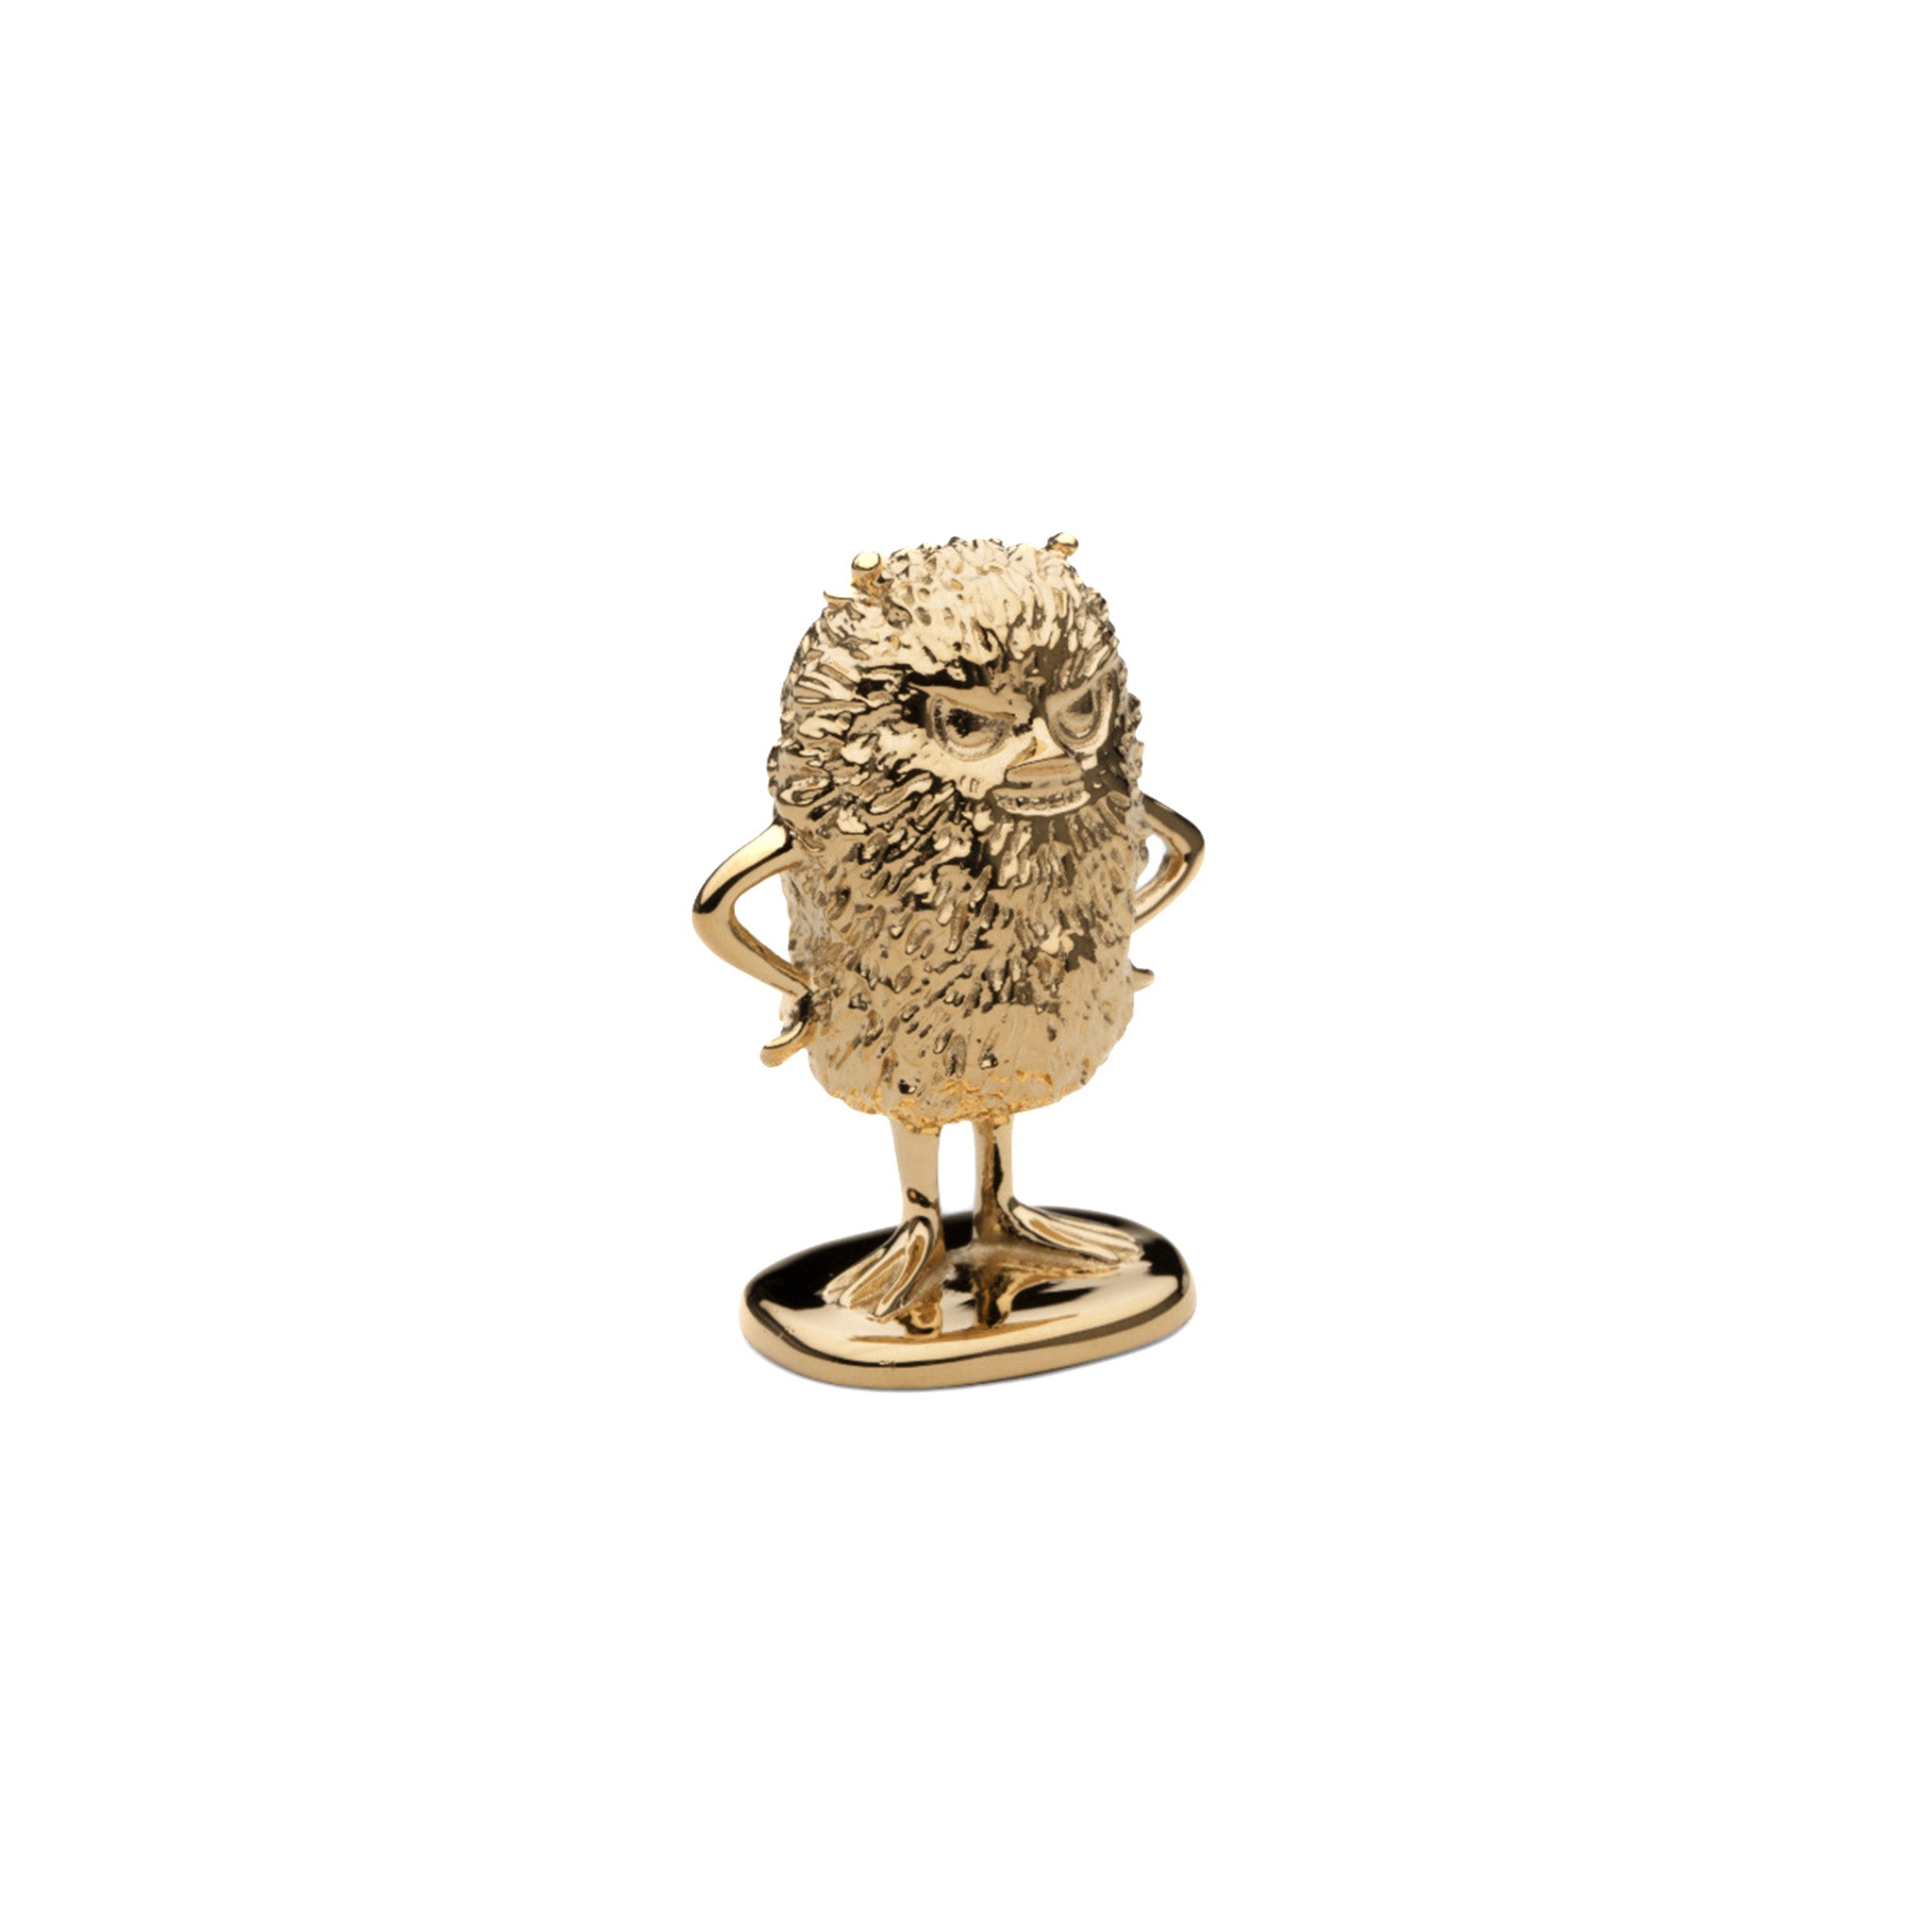 a gold figurine of moomin stinky facing at an angle on a white background